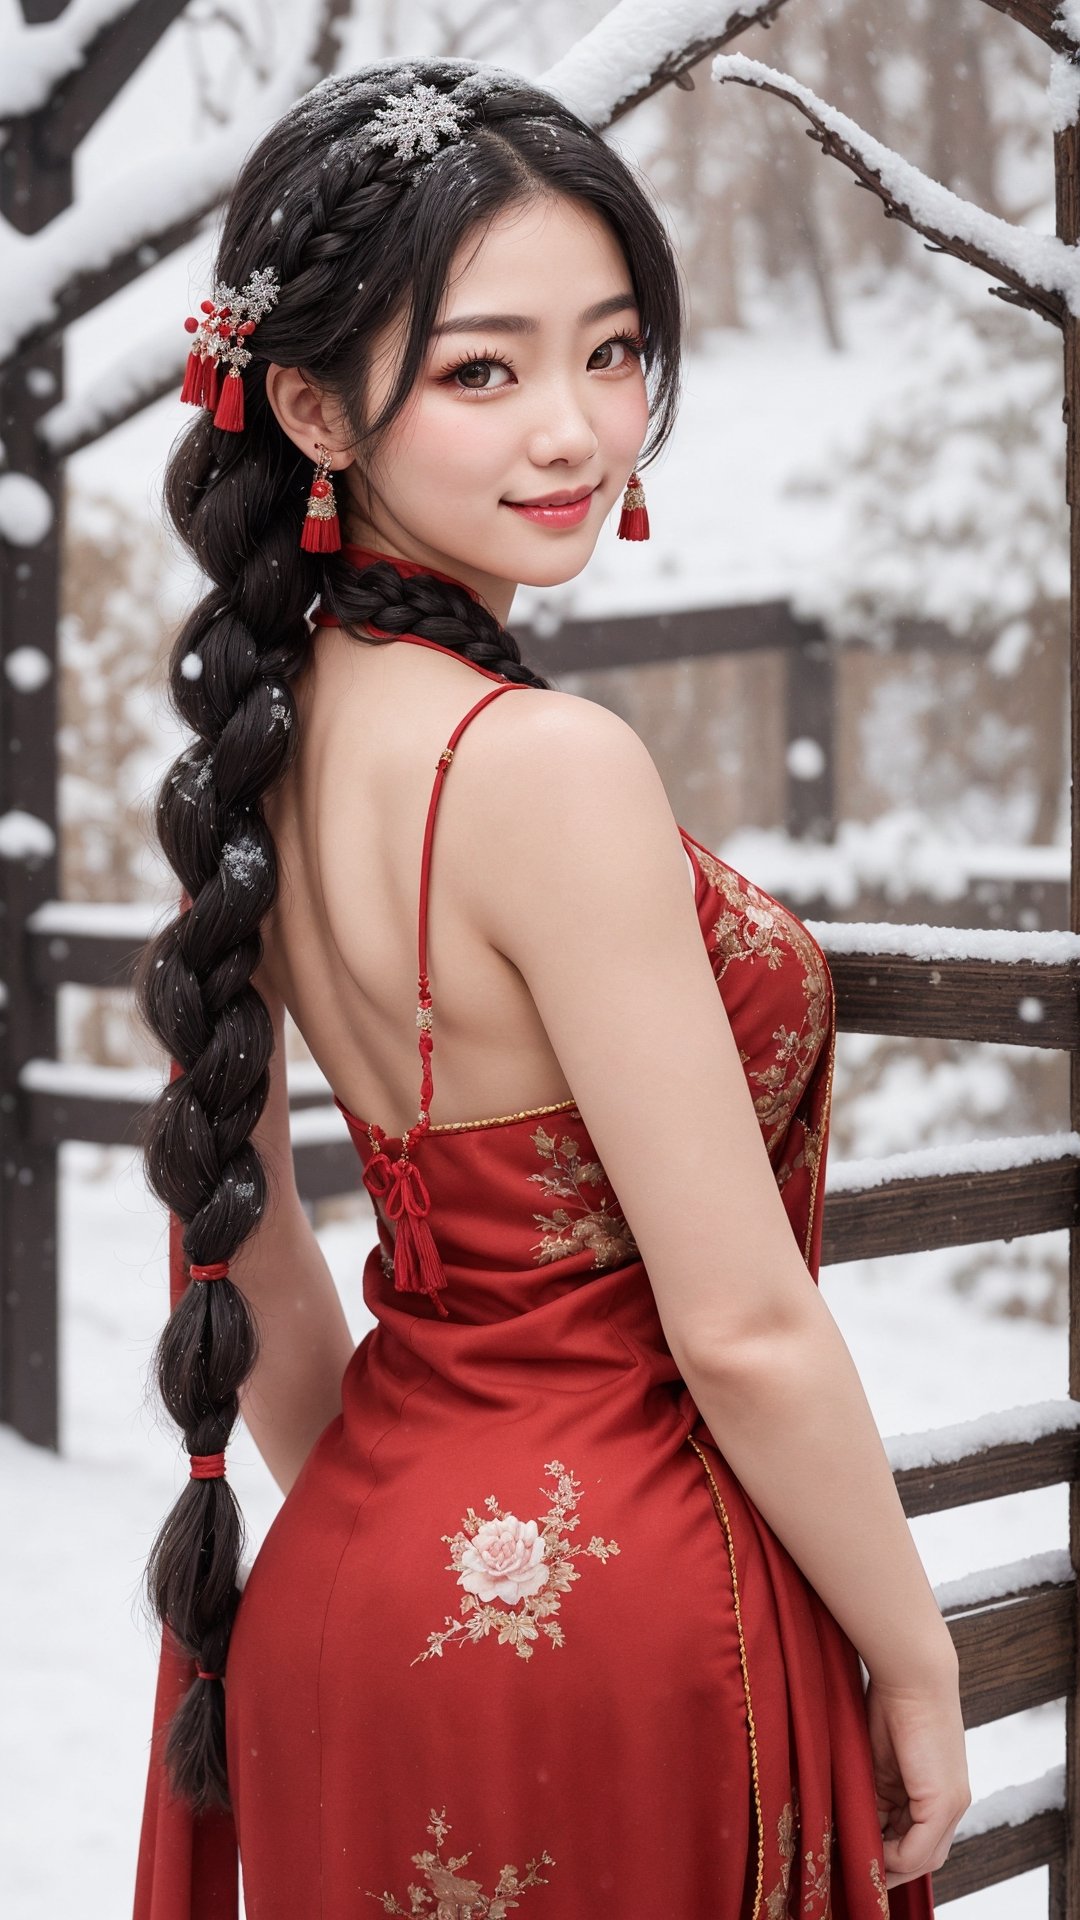 Jiaying, two graceful braids, bright black eyes, sly smile
, wearing a red traditional oriental costume with a black bel, fit
, cute, mysterious
, from front, arms behind back
,  (shallow depth of field photography,  looking at viewer, snow background)
, (perfect fingers:1.1)